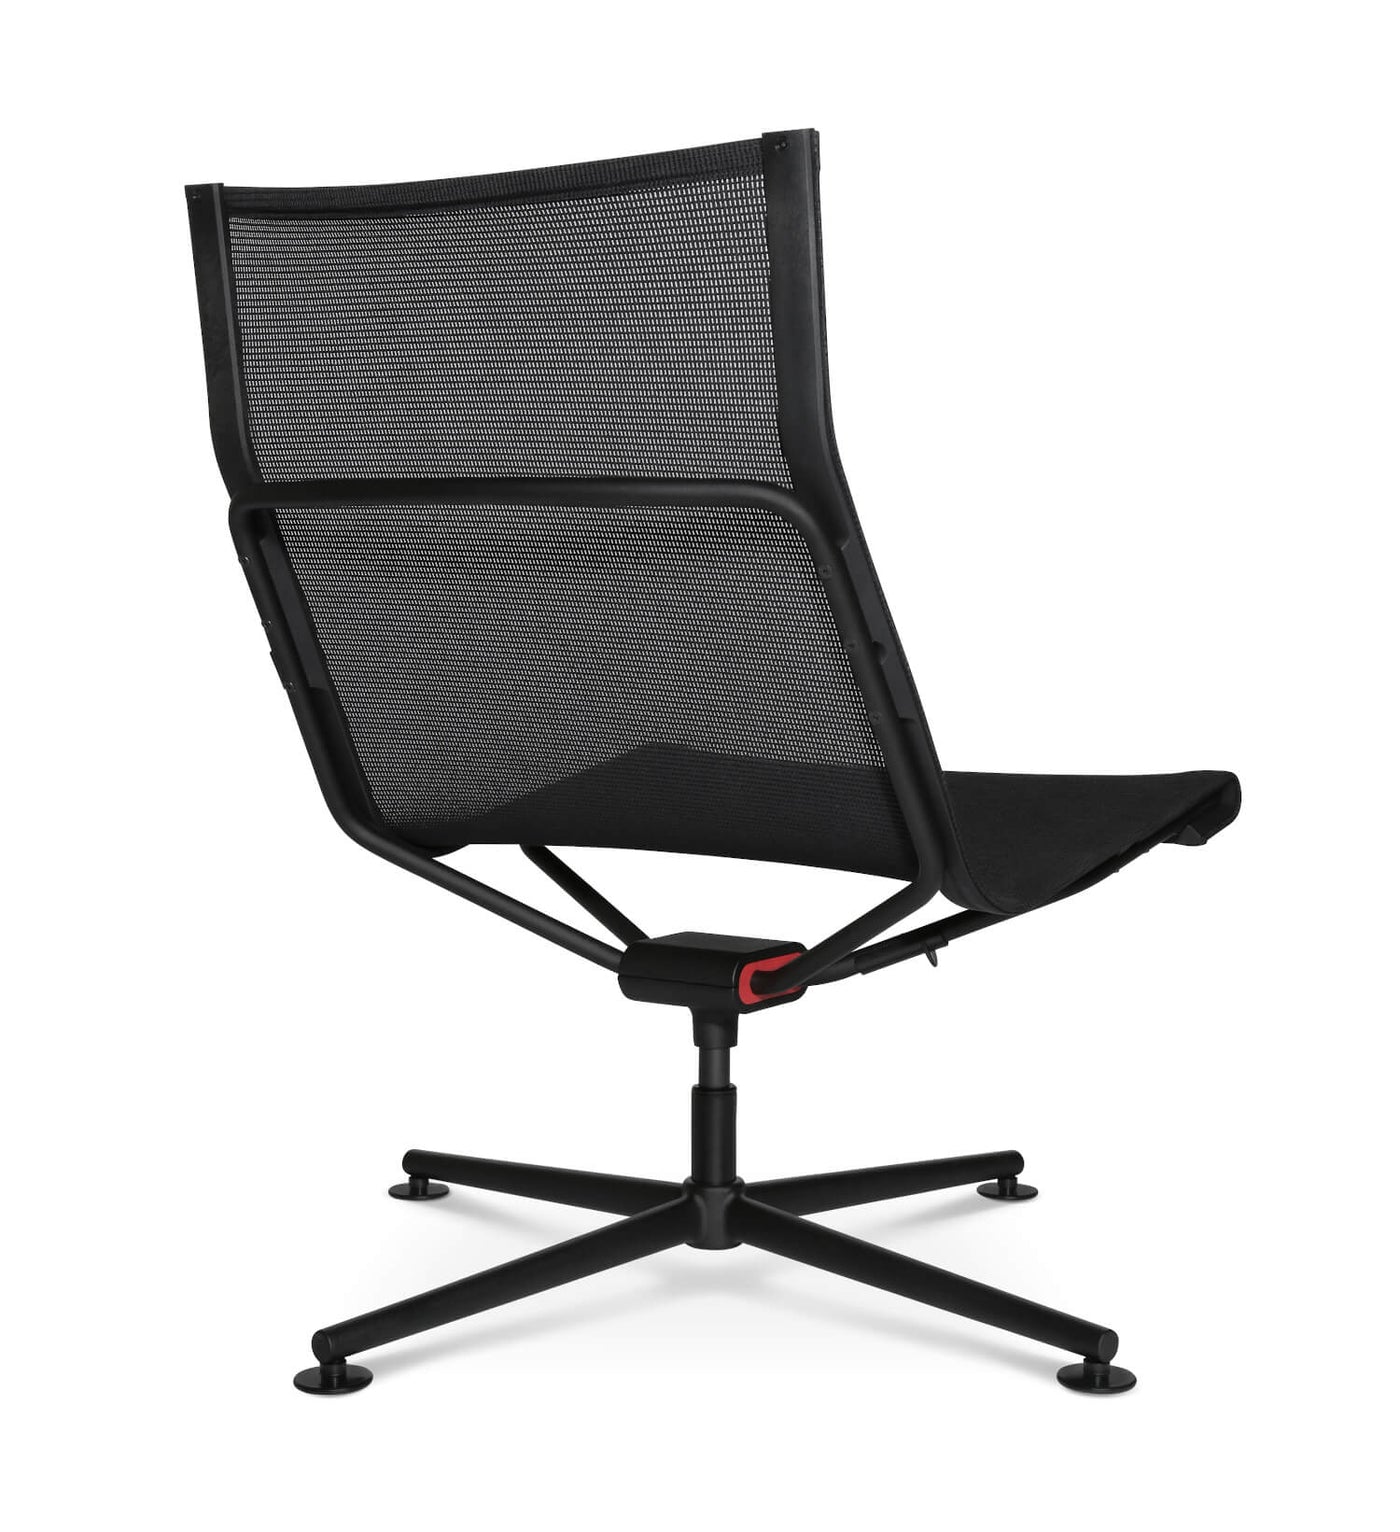 Wagner - D1 Low Lounge in schwarz - OFFICE CHAIRS - 123HomeOffice